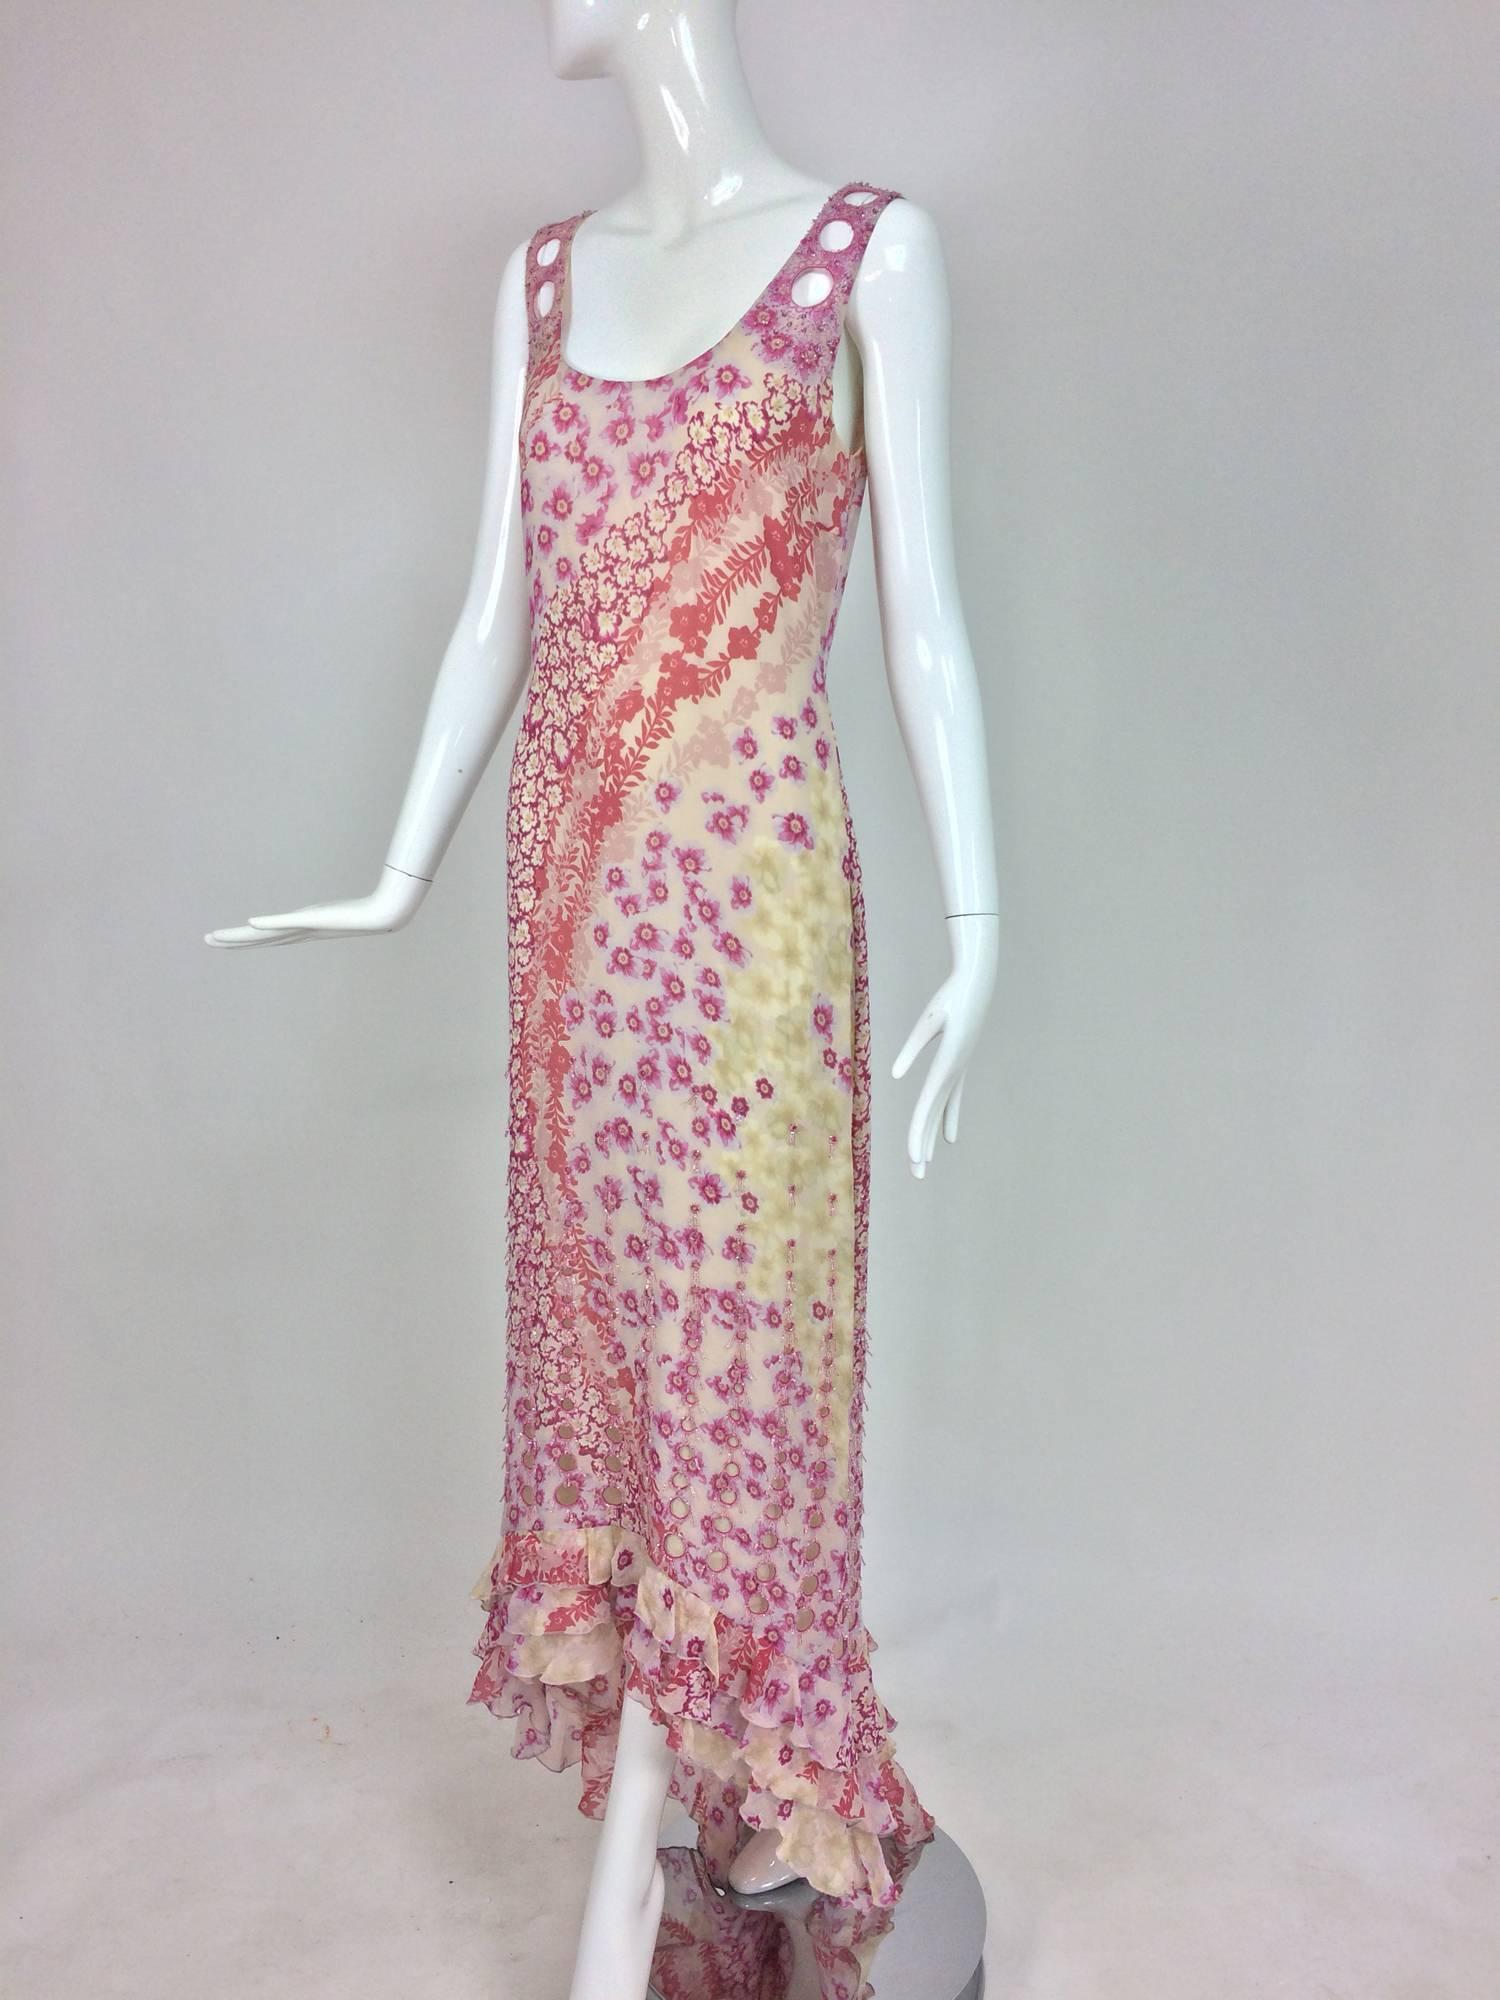 Badgley Mischka beaded floral chiffon maxi dress with train...Pretty spring/summery maxi dress glitters with crystal beading...The low scooped neckline features shoulder straps that have port holes that are bead outlined, the lower skirt of the